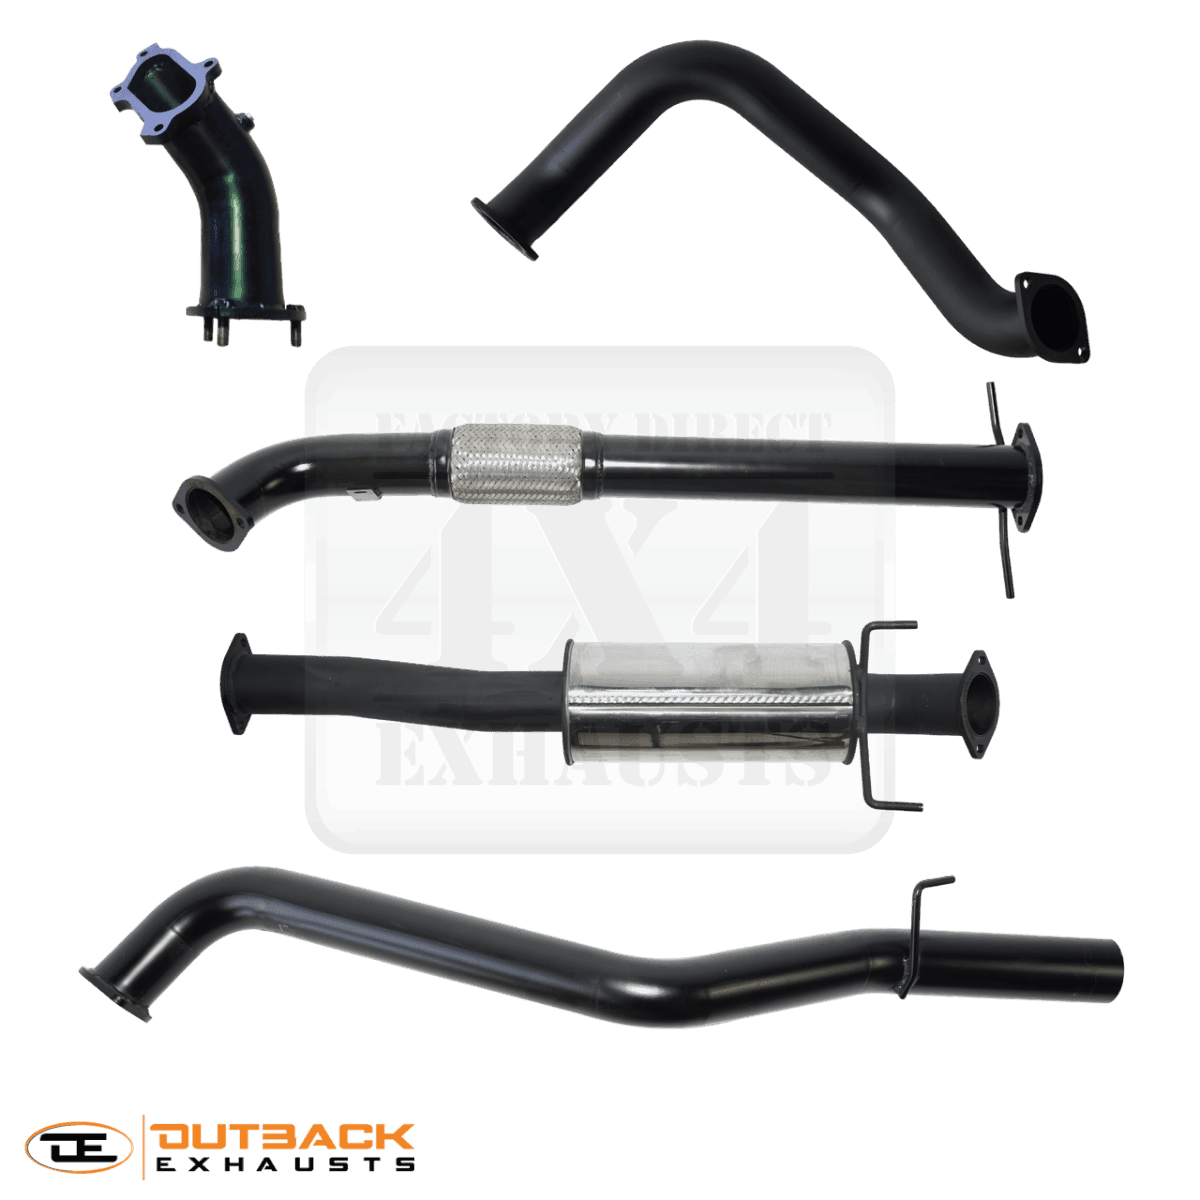 Outback 3" Exhaust to suit Toyota Surf Y-KZN130 - NZ Offroader